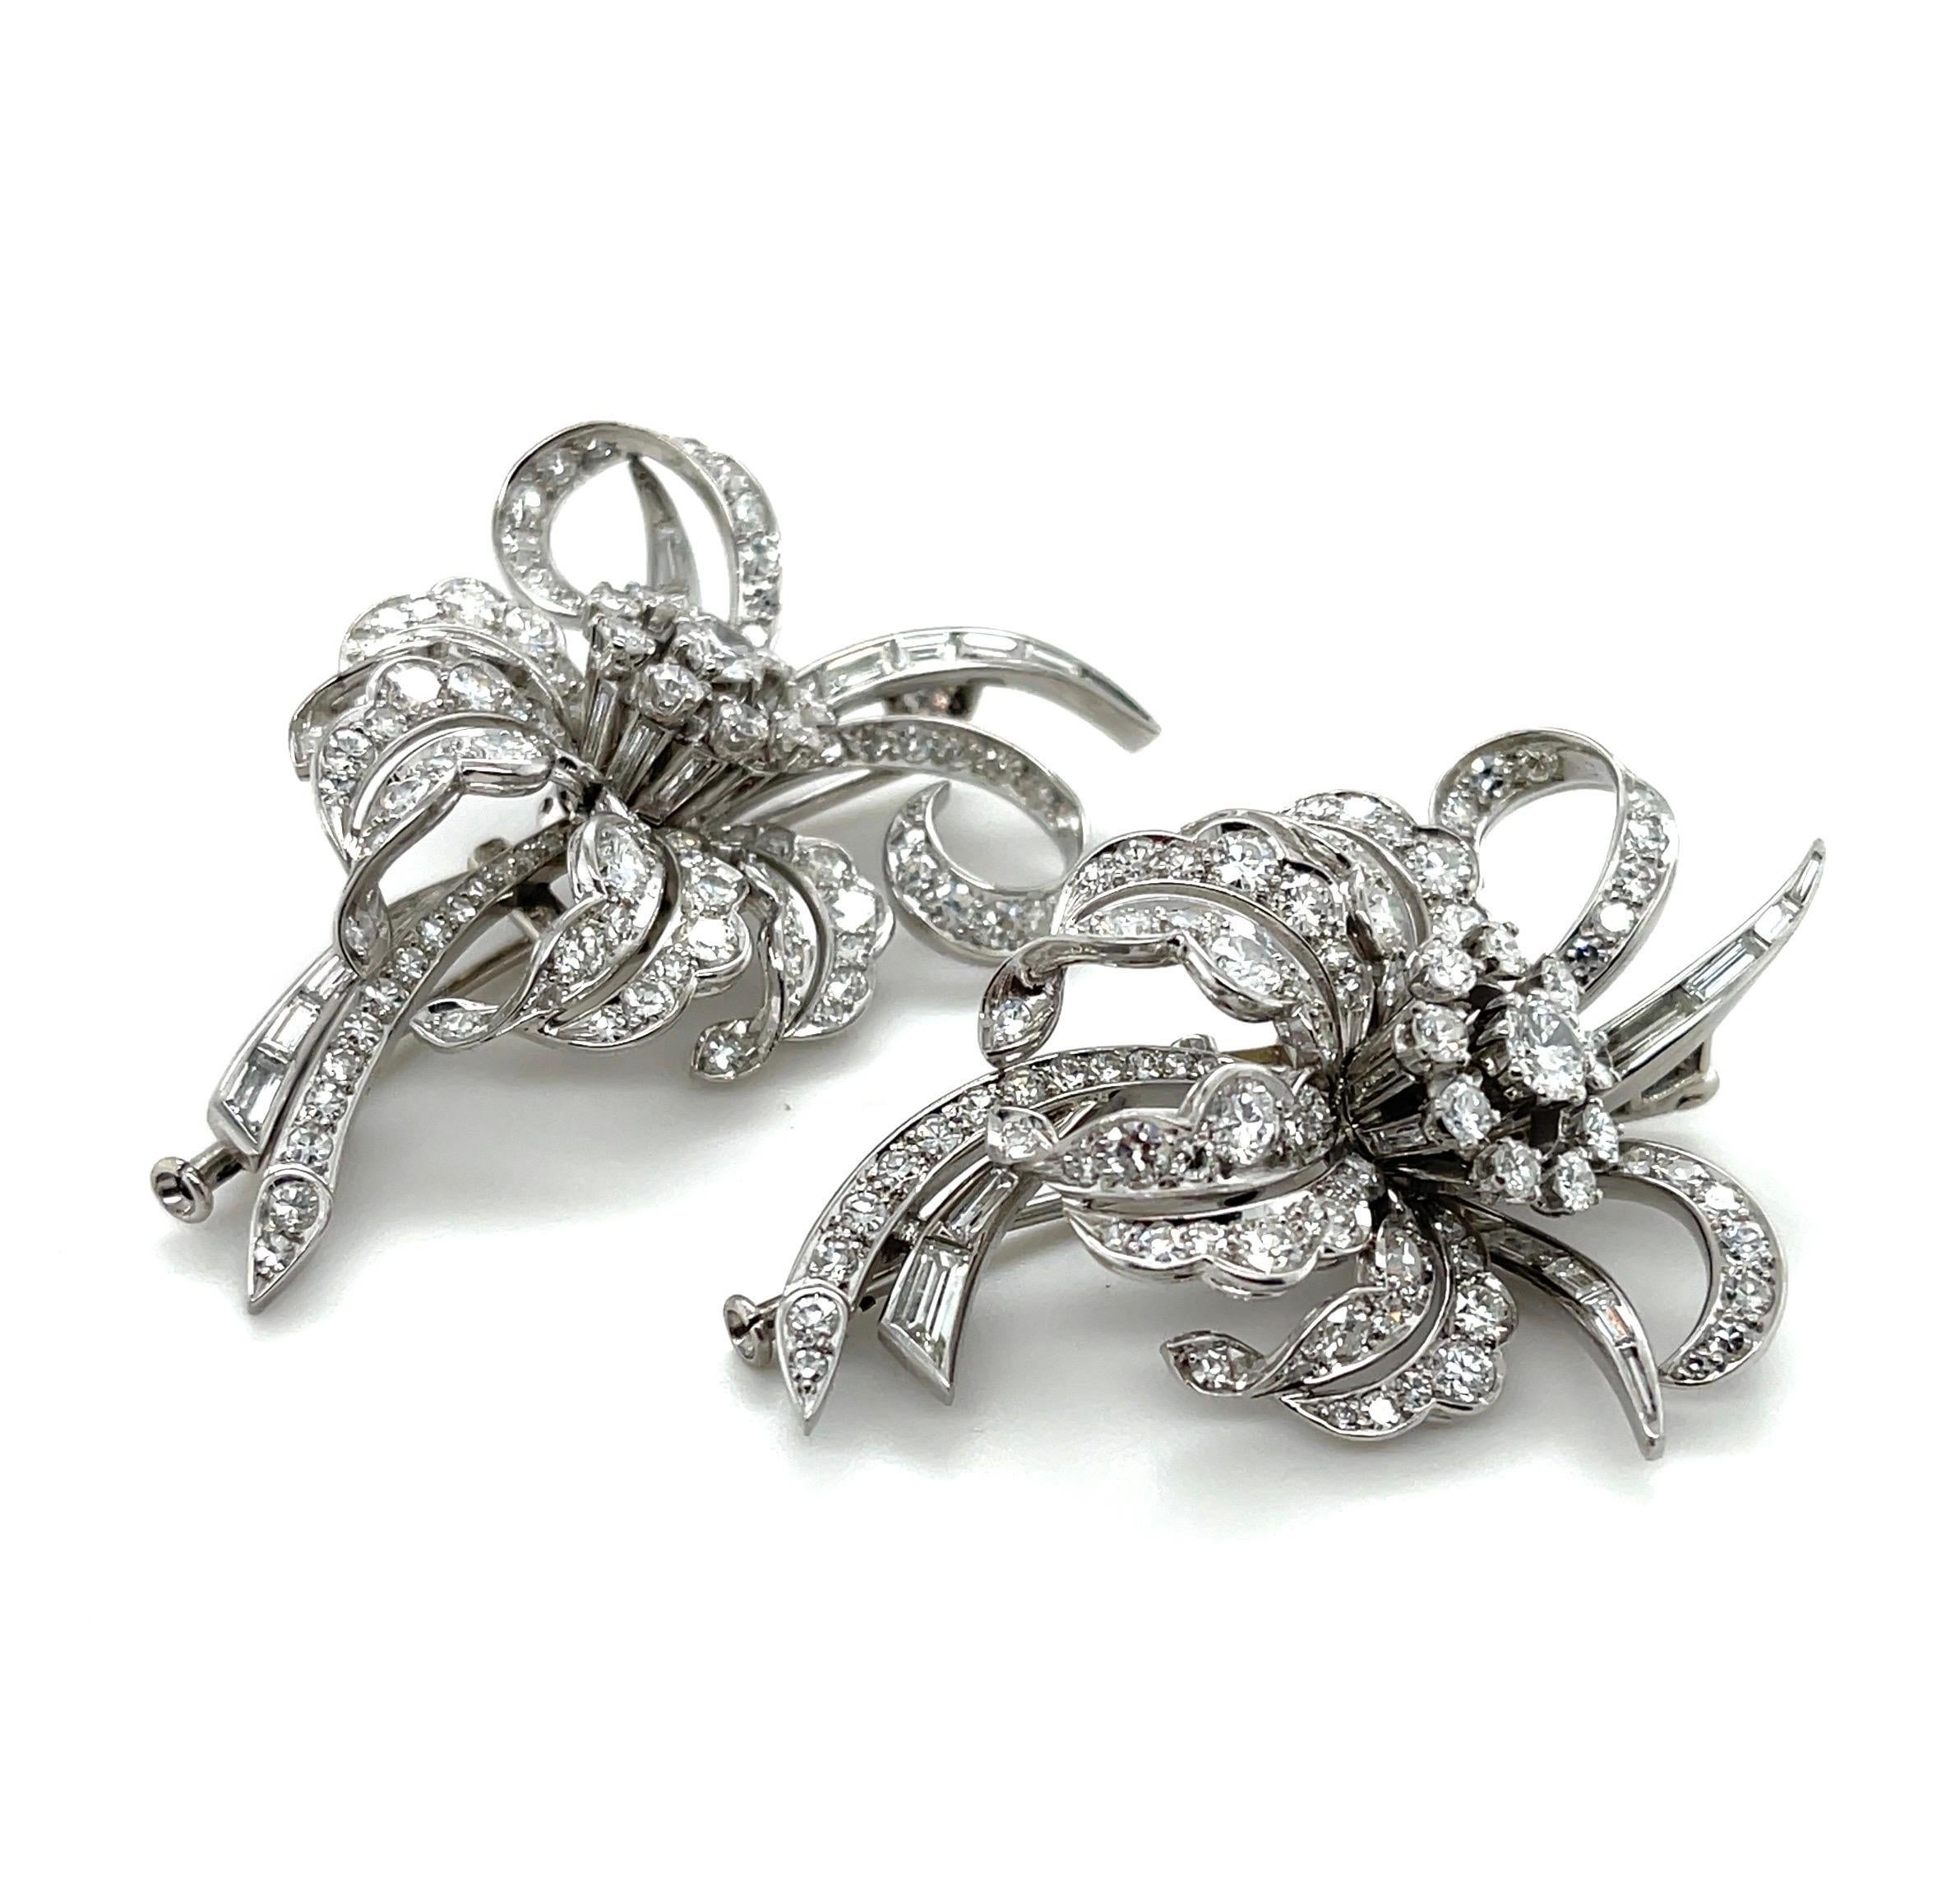 Magnificent French Hand Made Platinum & Diamond Brooch For Sale 3